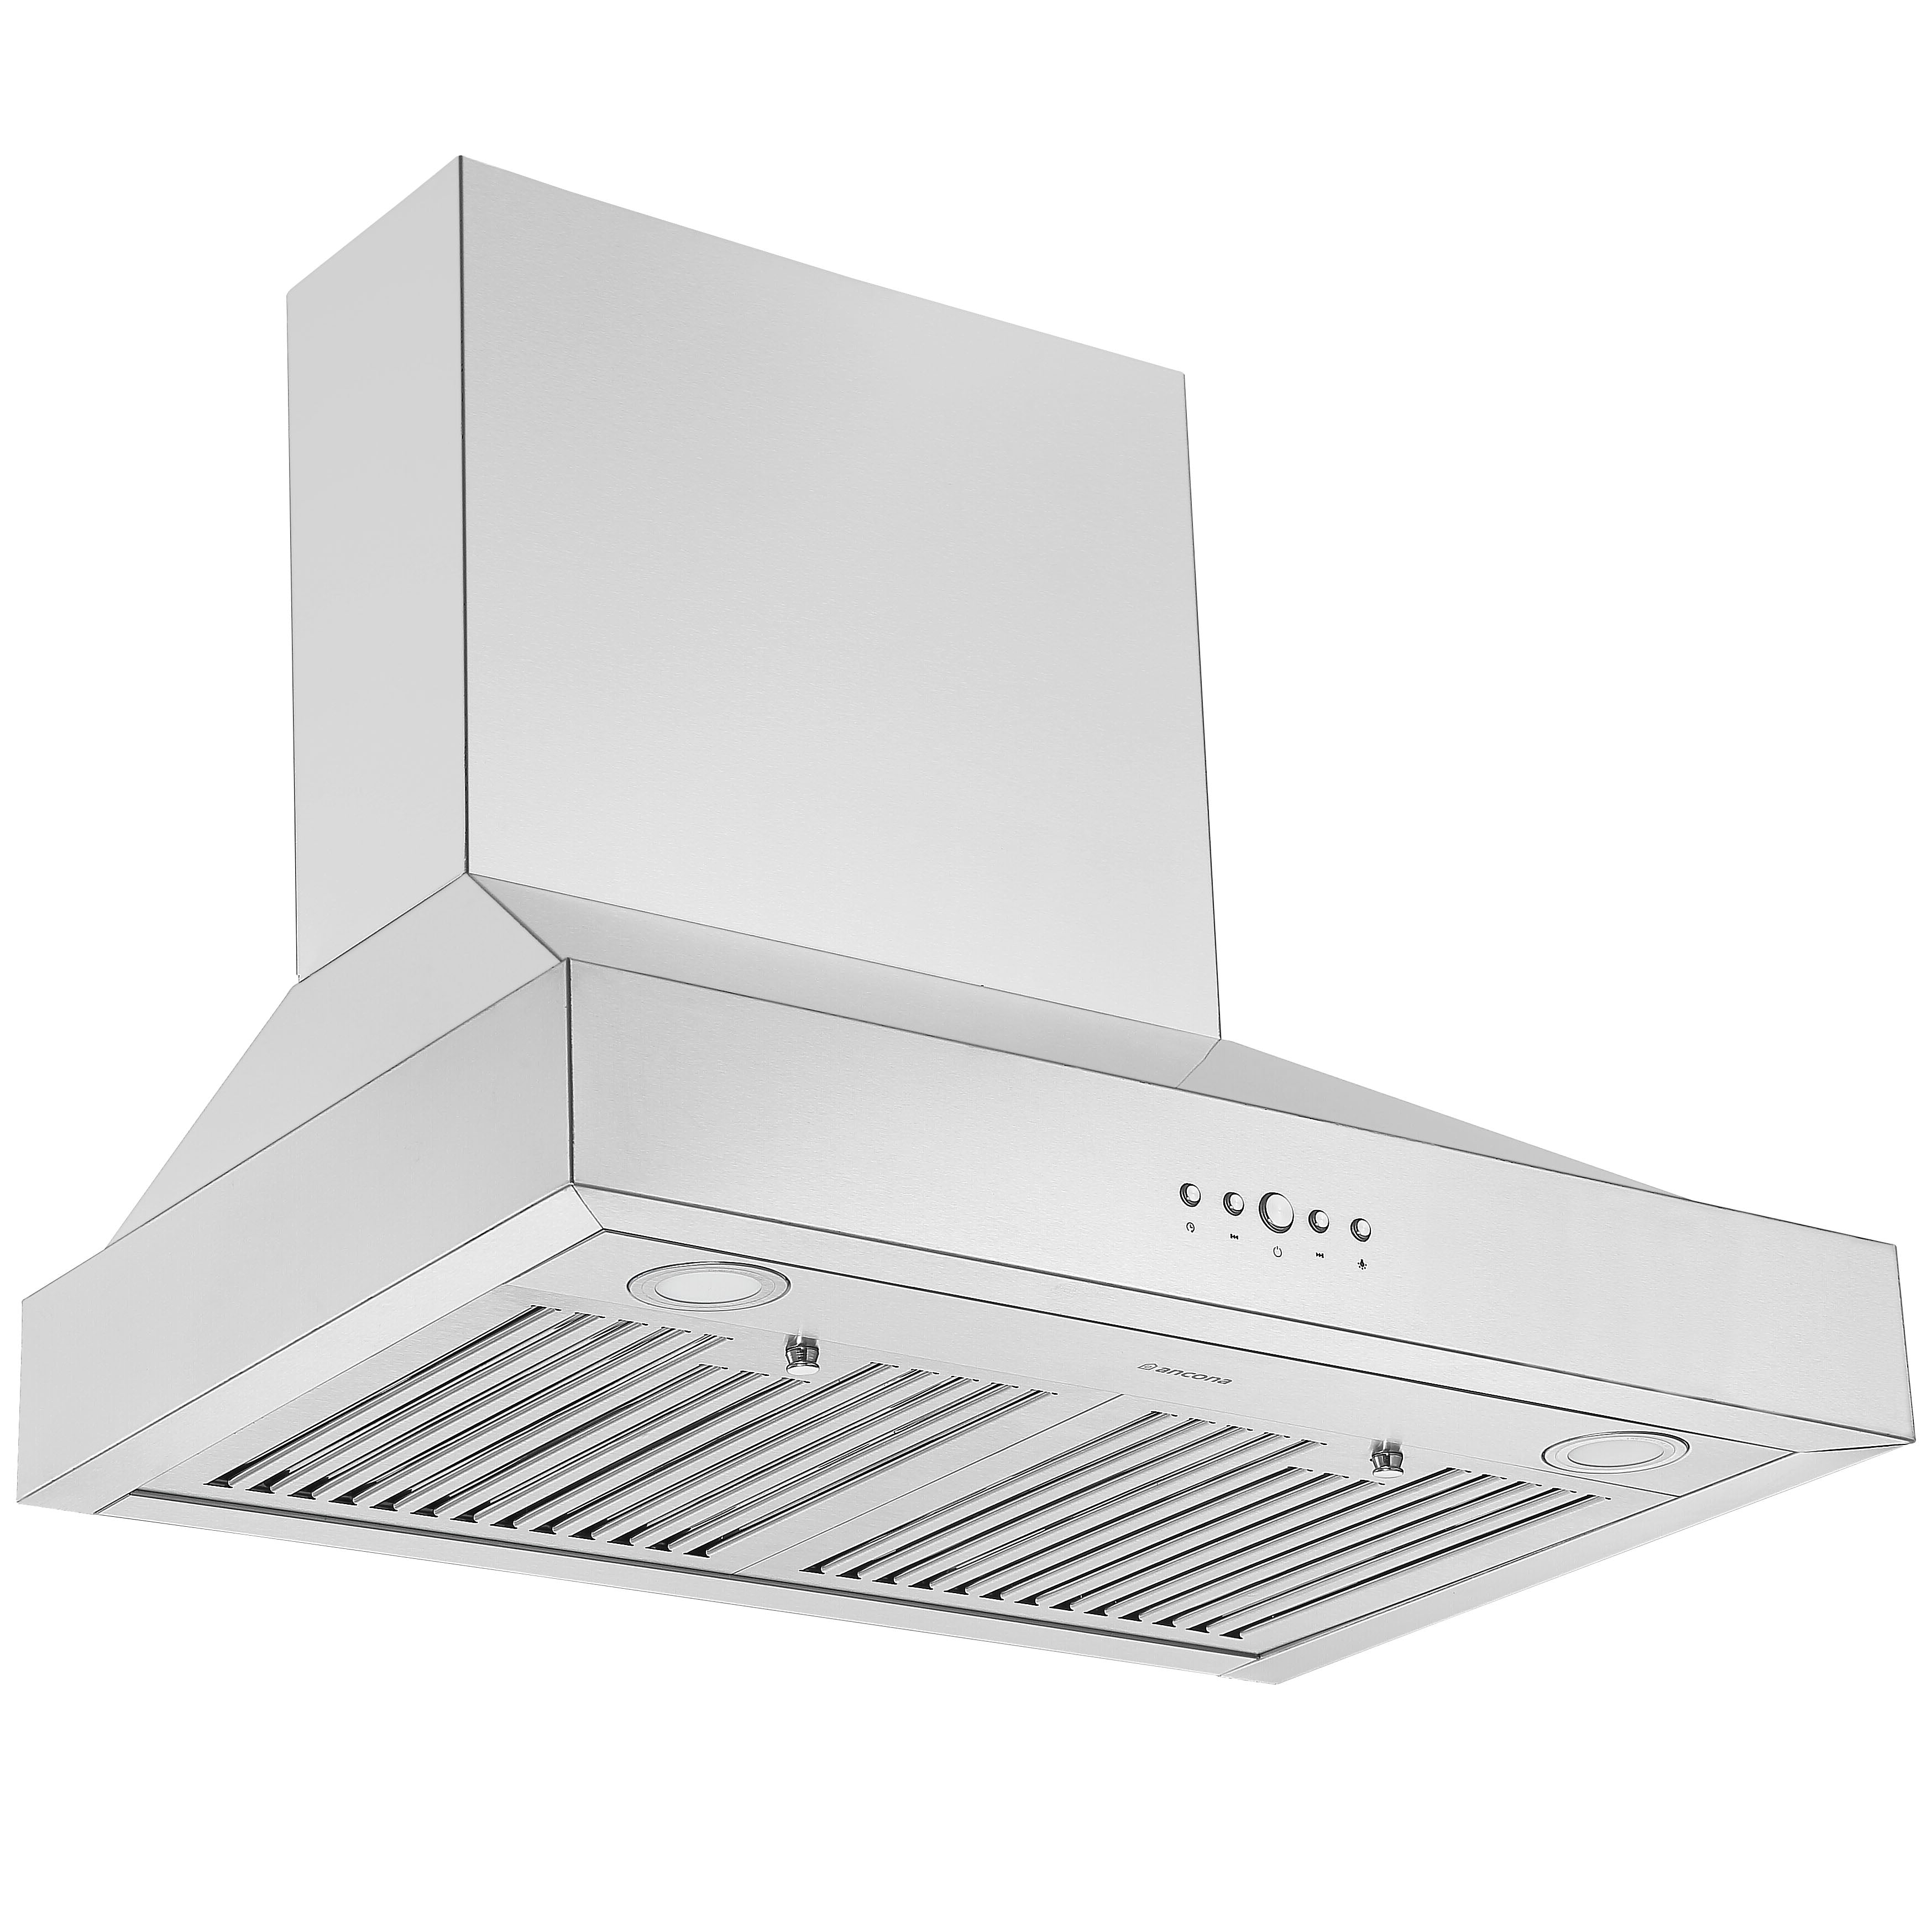 30 in. Pro Series Wall-Mounted Pyramid Range Hood in Stainless Steel